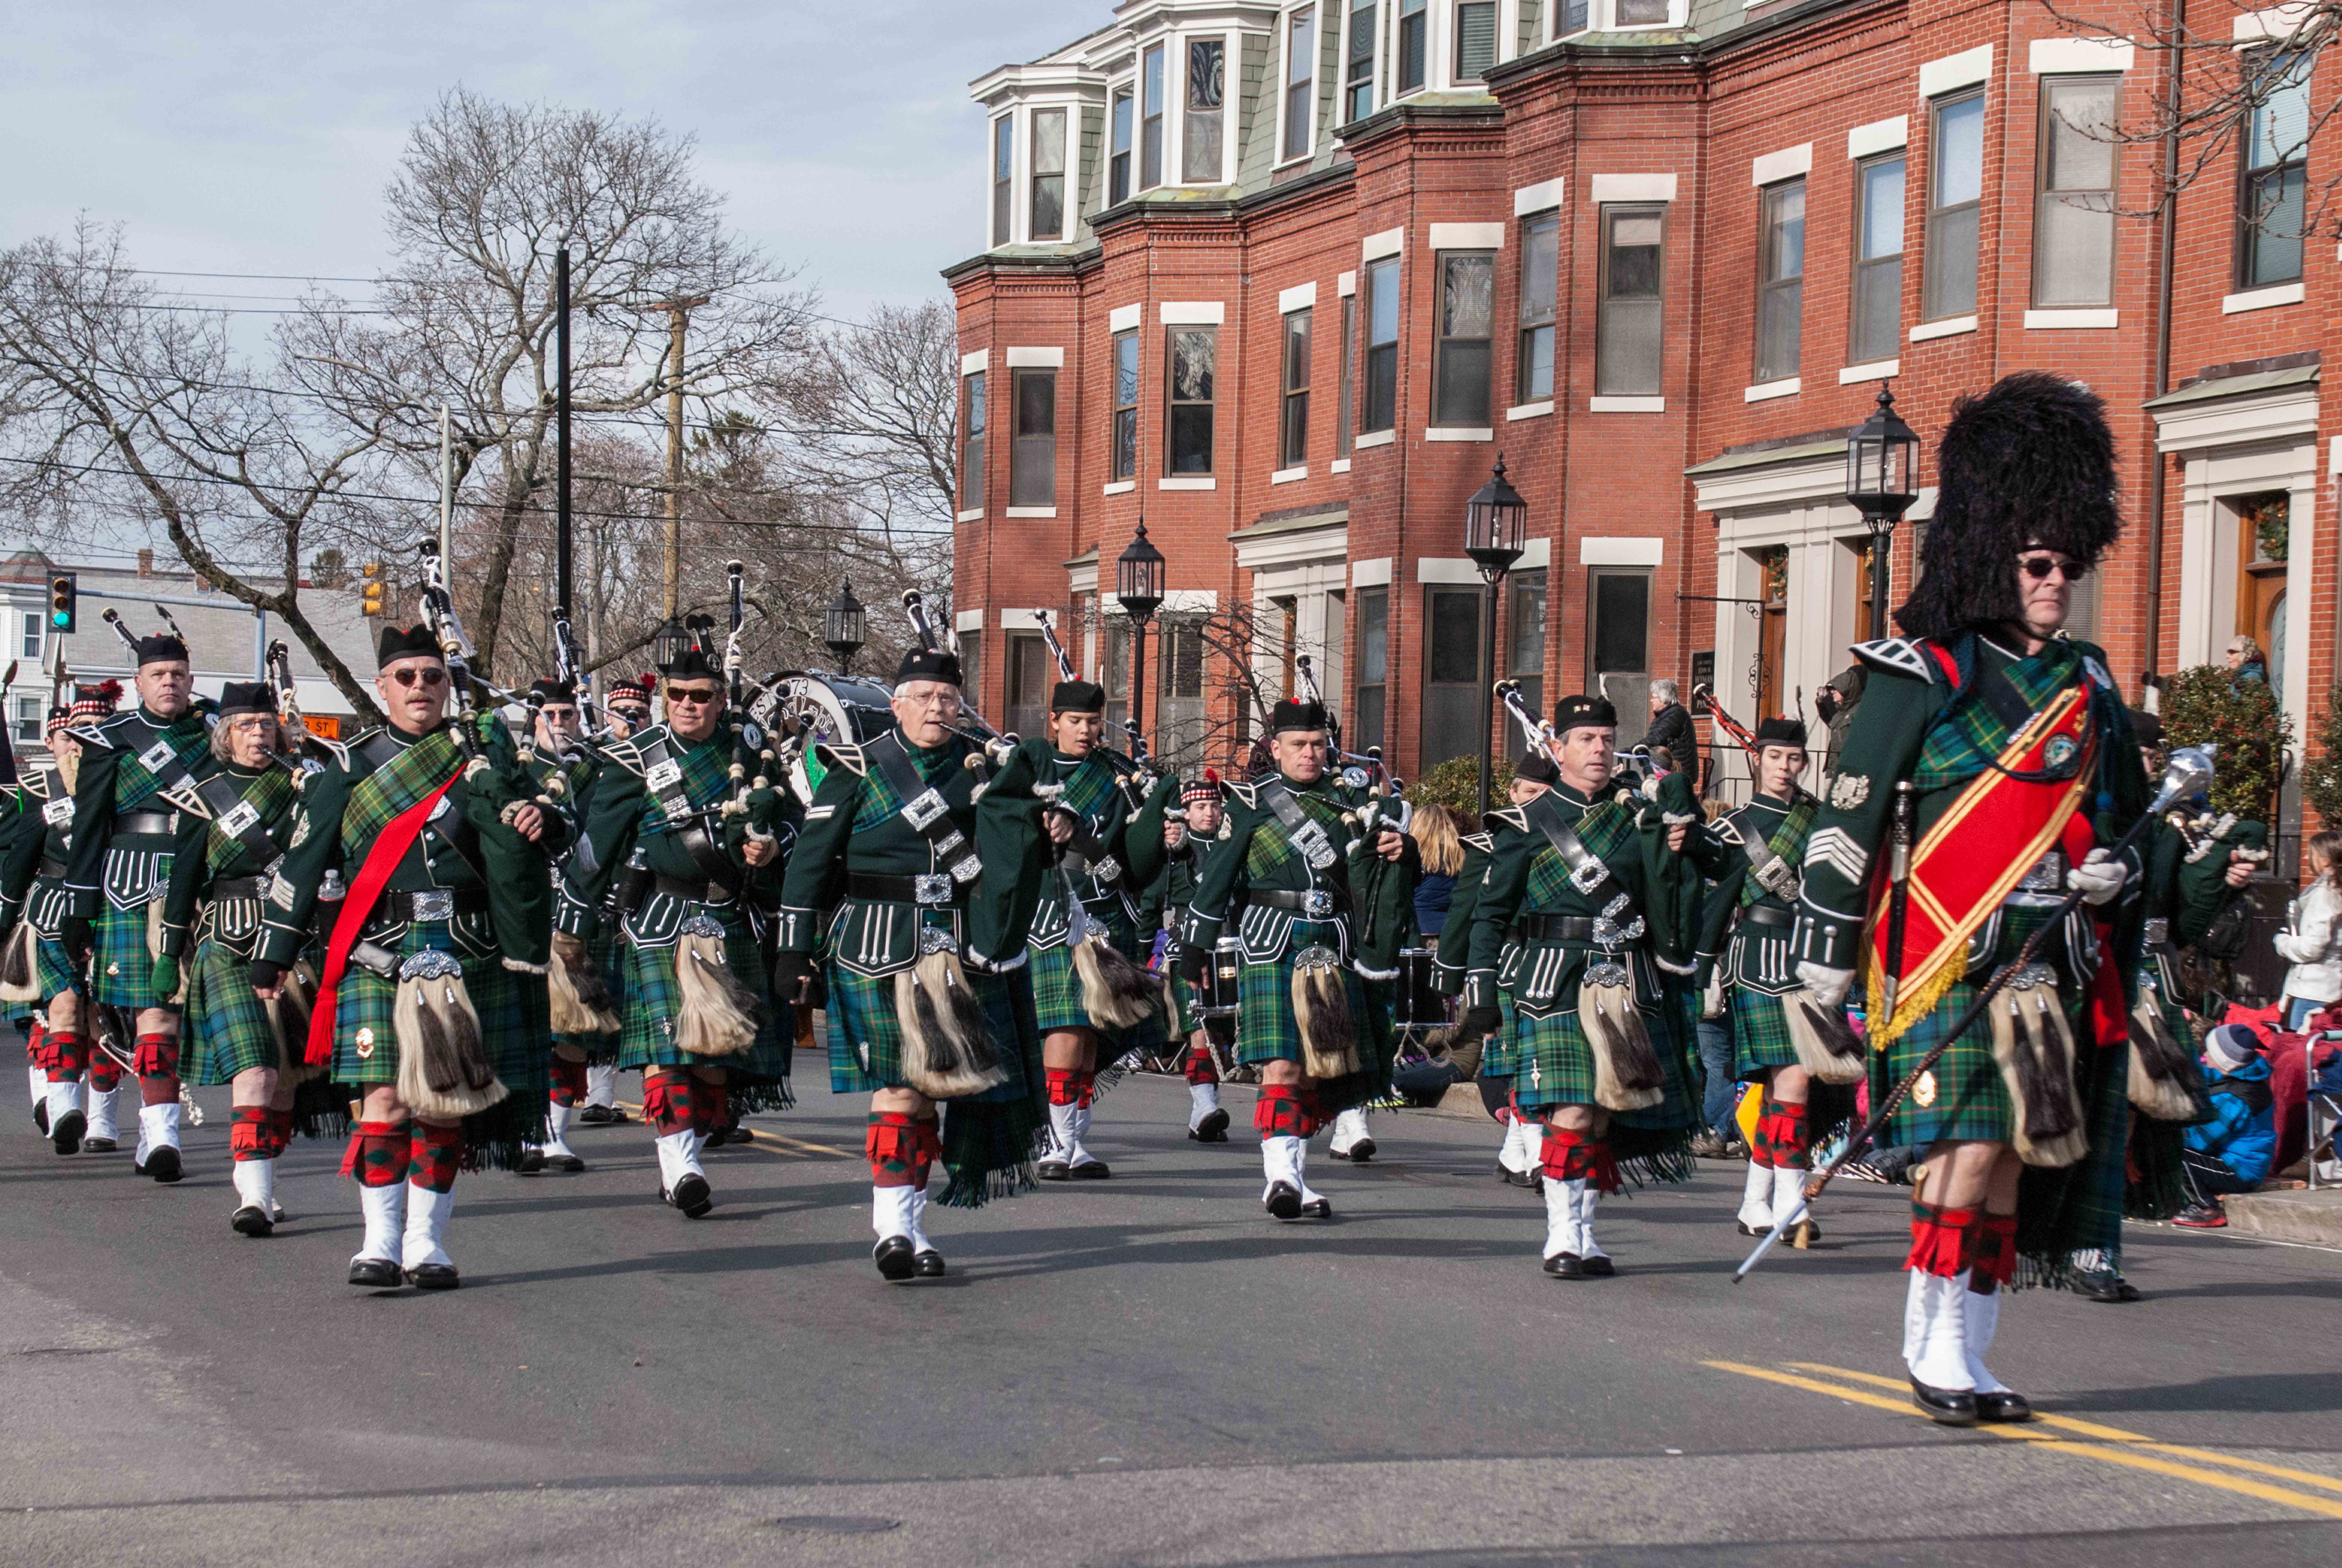 The band wearing the traditional dress uniform of the Highland Light Infantry, marching in the Plymouth Thanksgiving parade.